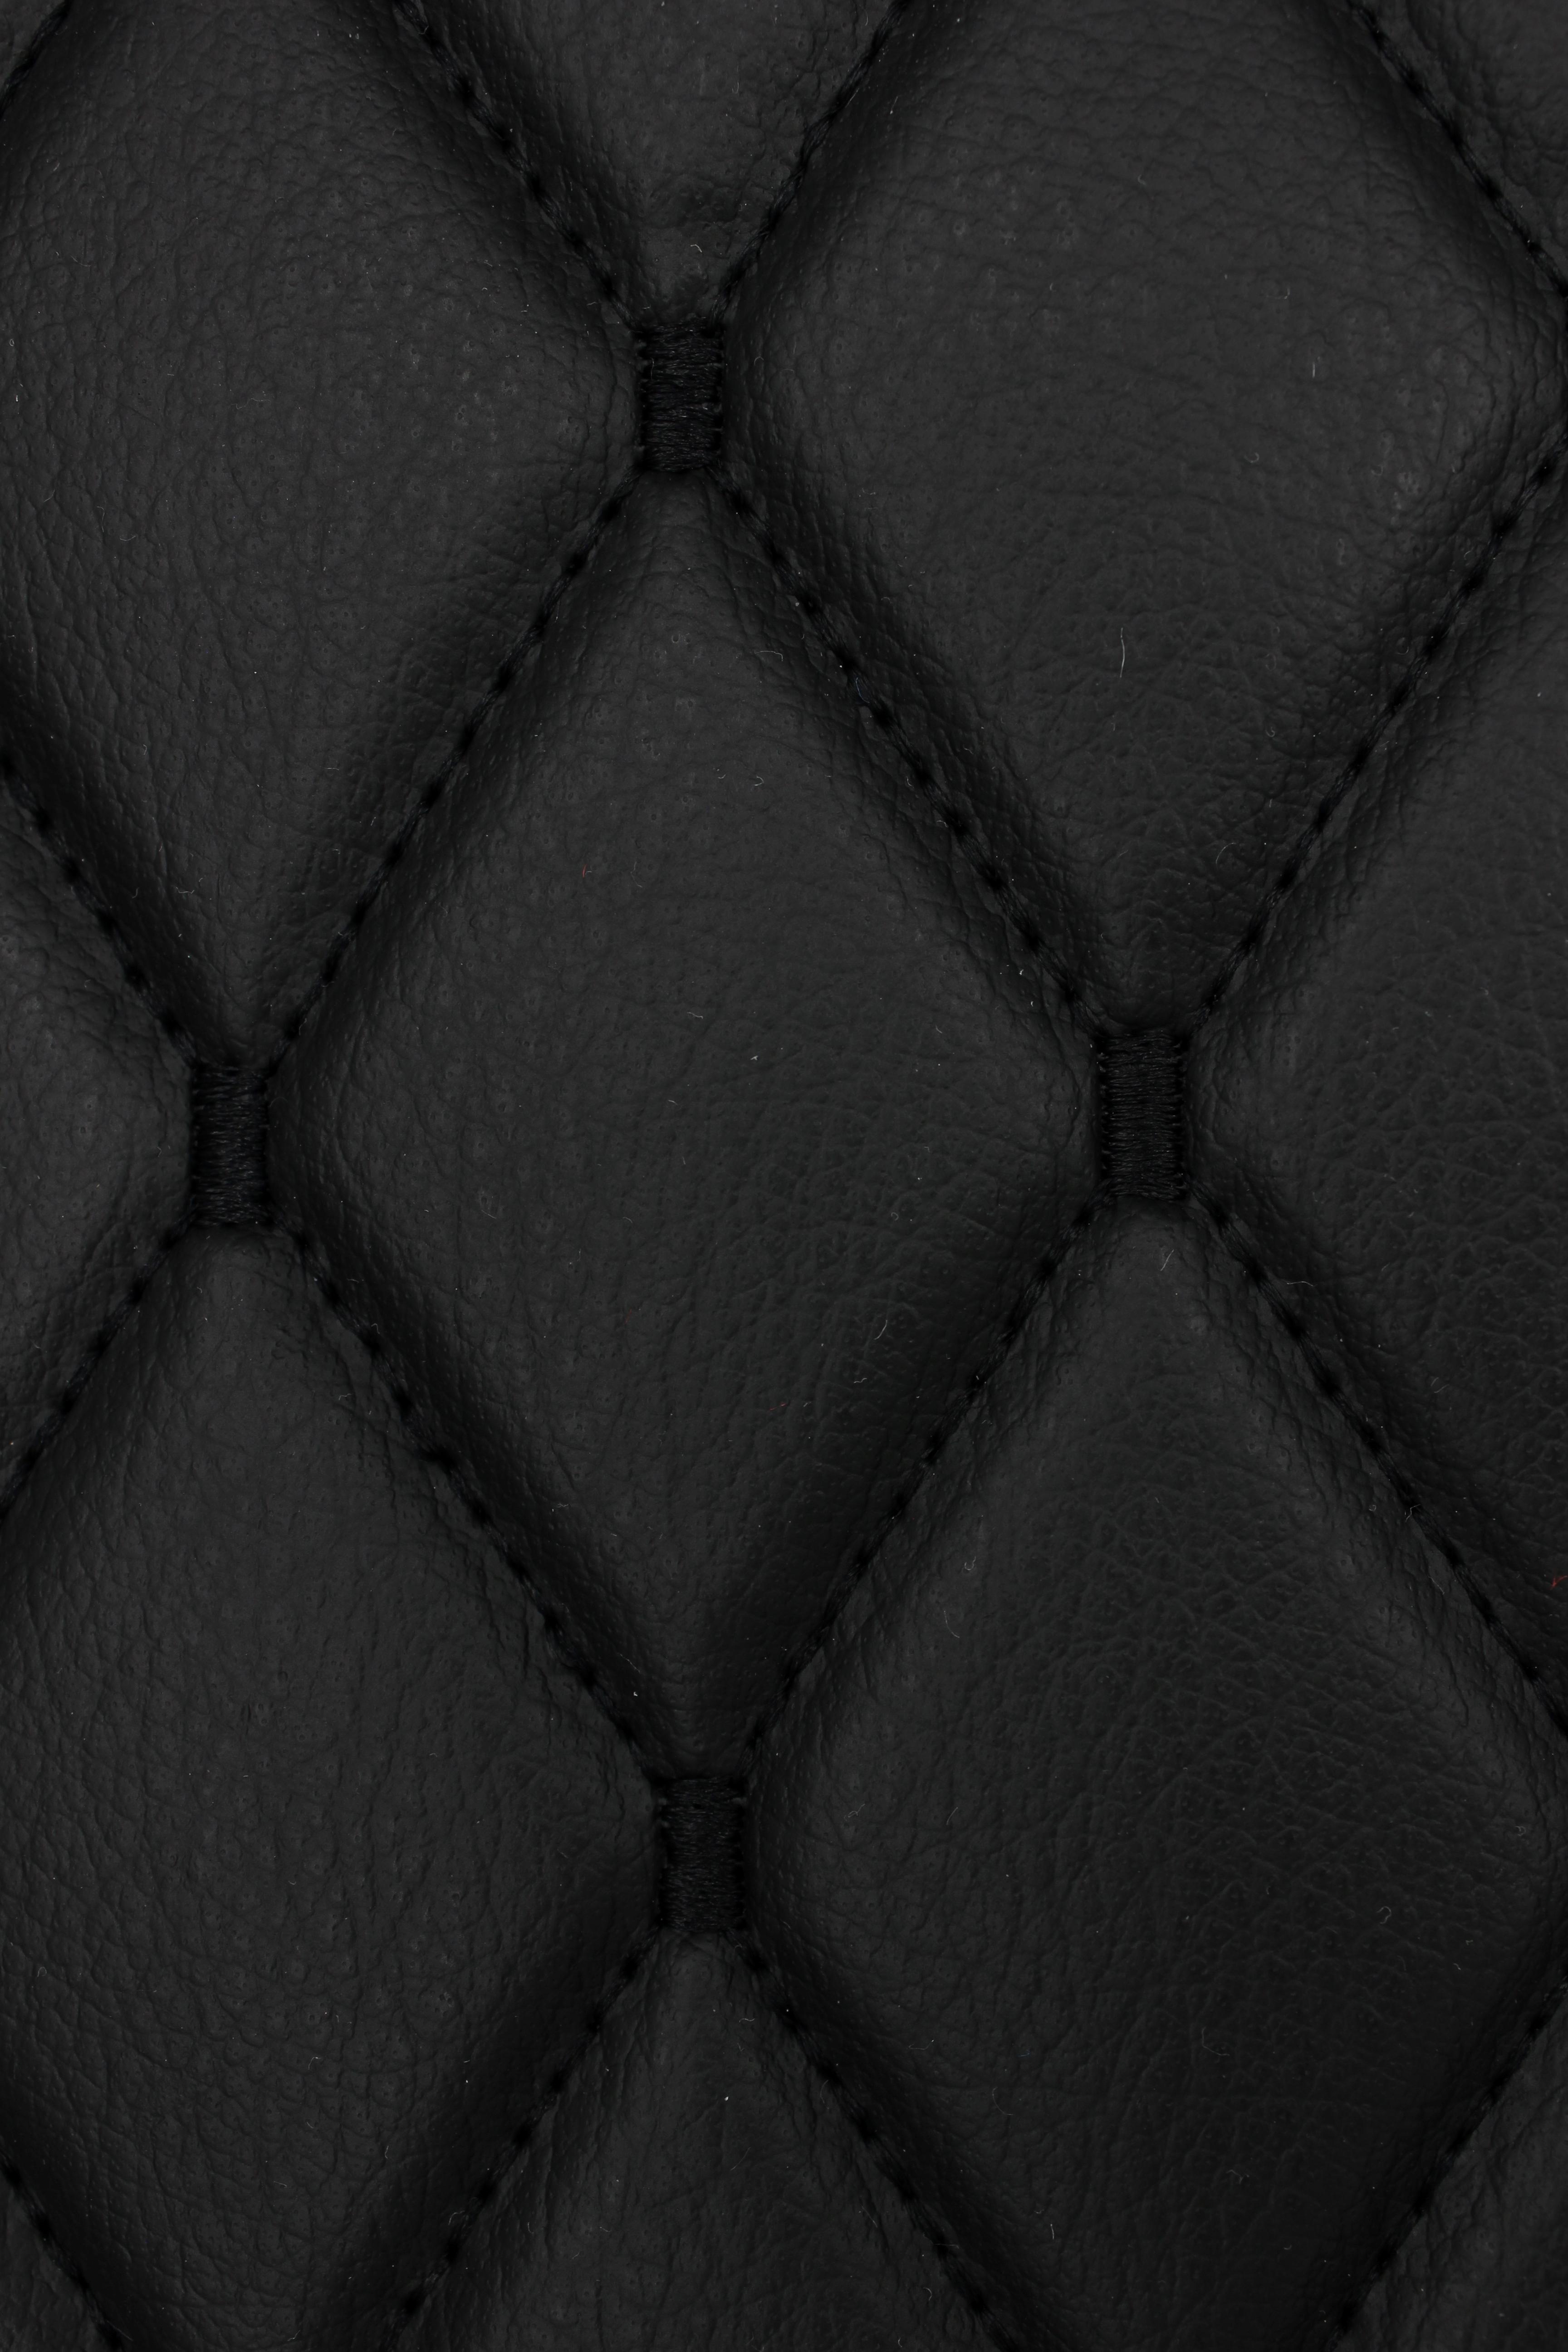 Black Quilted Black Vinyl Grain Faux Leather Car Upholstery Fabric | 2"x3" - 5x8cm Diamond Stitch with Foam | 140cm & 55.1" Wide | Artificial Leather